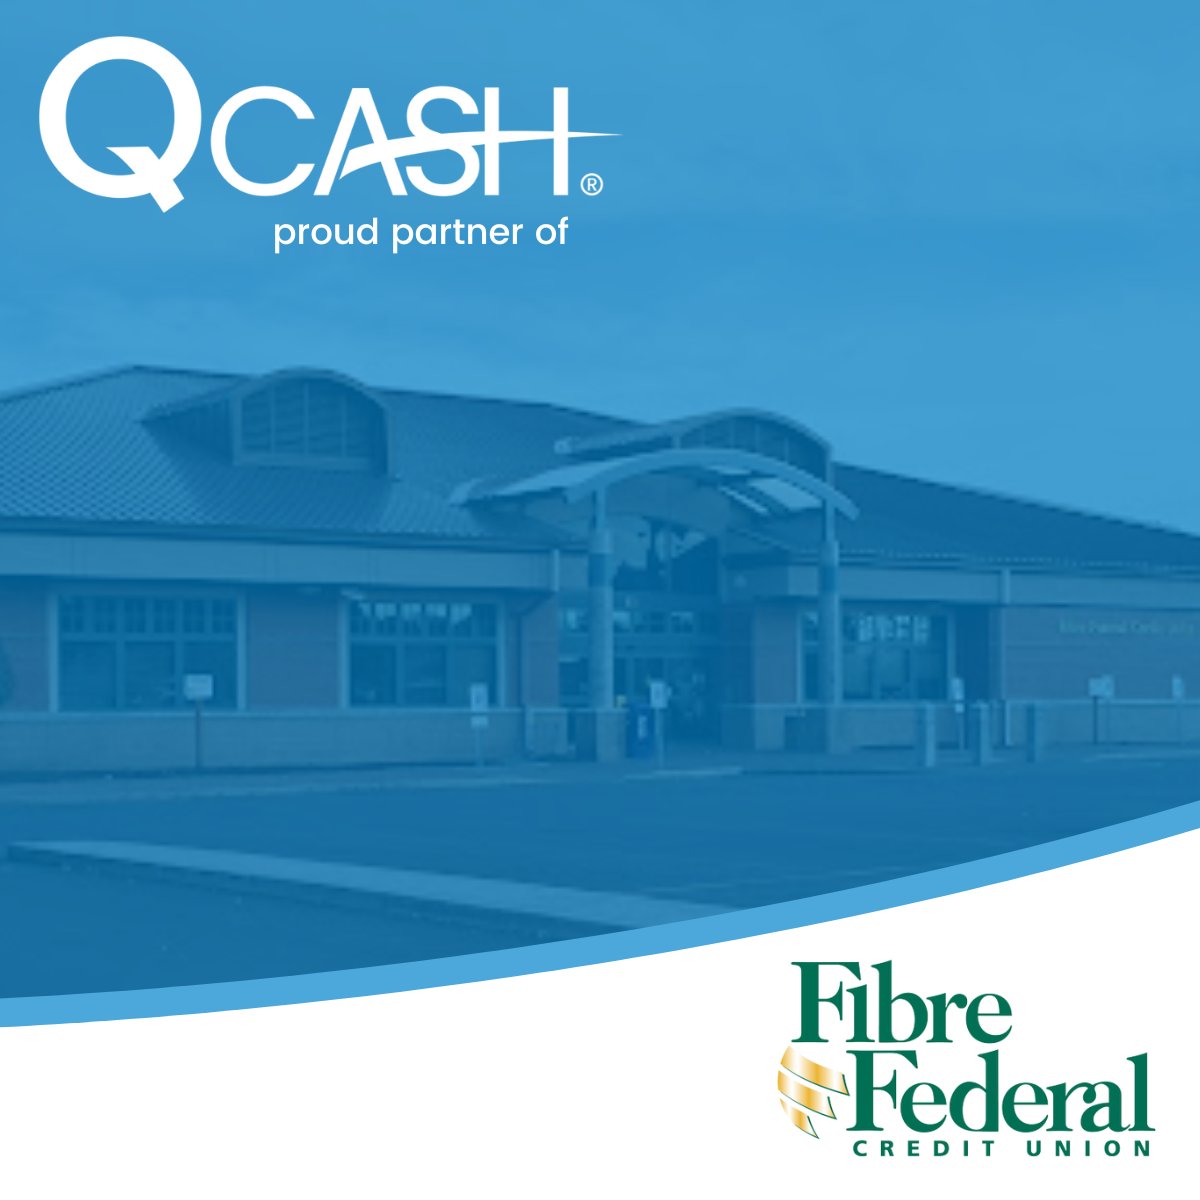 Dreams of affordable member loans began 86 years ago. With @FibreCU, dreams become reality! Together, we can offer members a digital, Life Event Loan. Members have access 24/7 without a credit check. Welcome to the QCash Family! #CreditUnions #CUSOAdvantage #LifeEventLoans